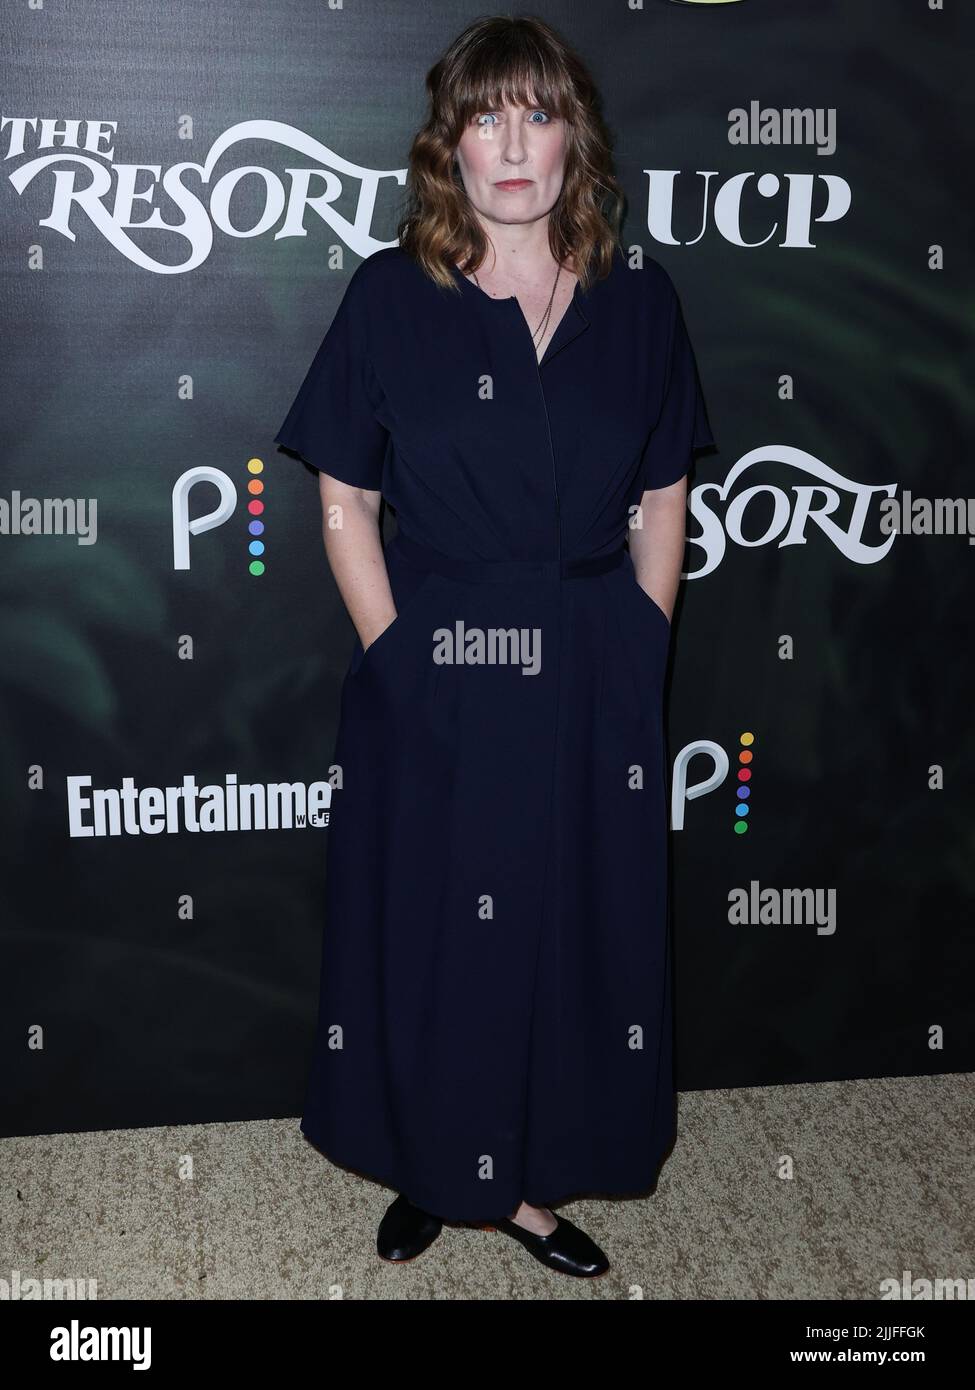 Hollywood, United States. 25th July, 2022. HOLLYWOOD, LOS ANGELES, CALIFORNIA, USA - JULY 25: Executive Producer Allison Miller arrives at the Los Angeles Premiere Screening For Peacock's Original Series 'The Resort' hosted by Peacock, UCP and Entertainment Weekly held at The Hollywood Roosevelt Hotel on July 25, 2022 in Hollywood, Los Angeles, California, United States. (Photo by Xavier Collin/Image Press Agency) Credit: Image Press Agency/Alamy Live News Stock Photo